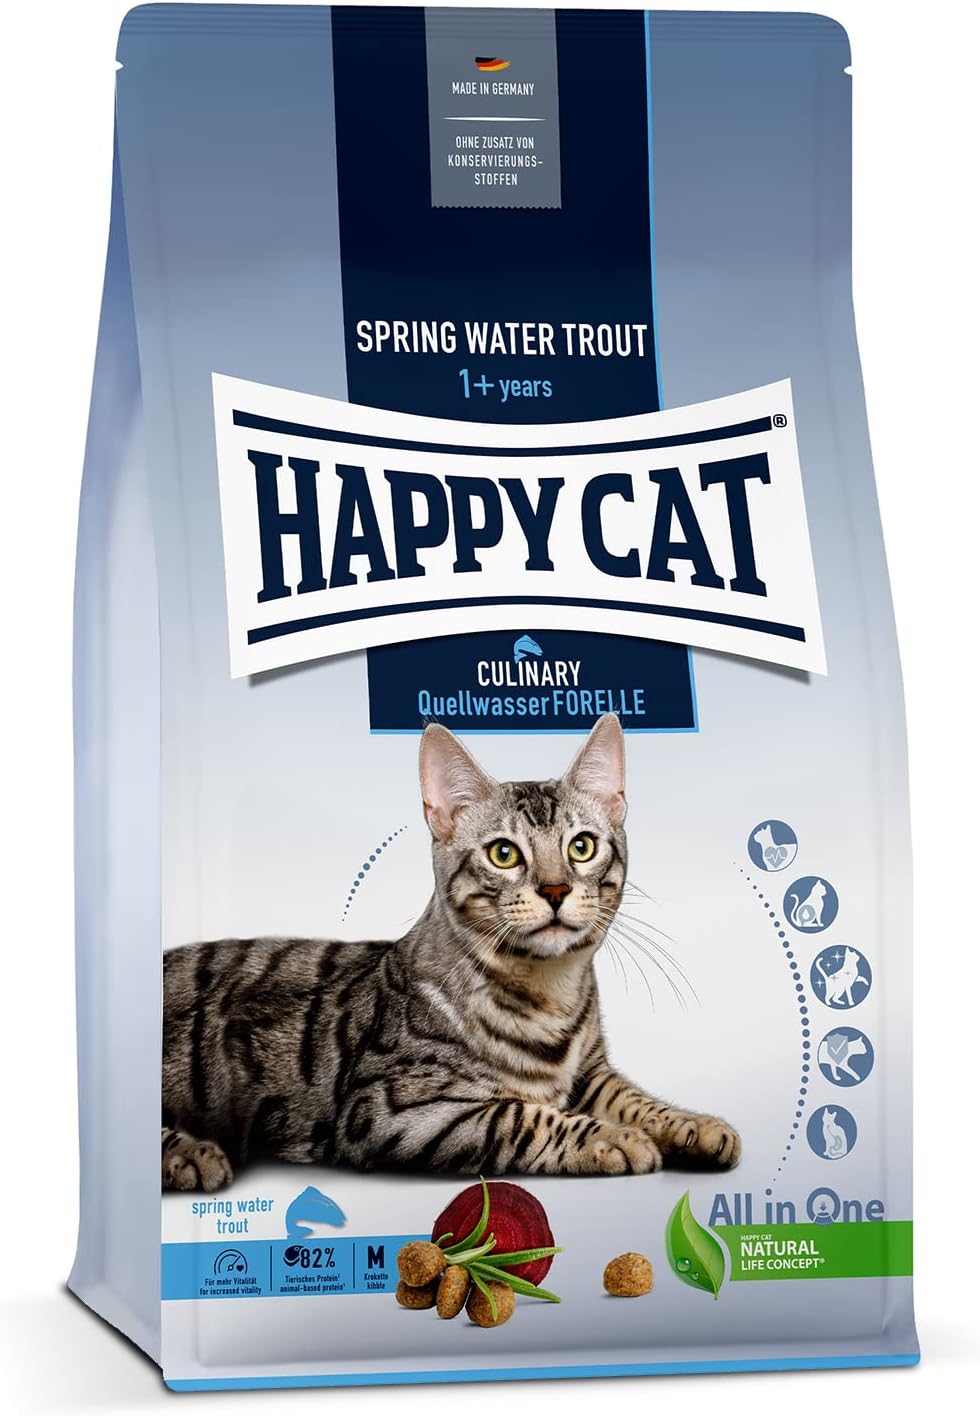 Happy Cat Culinary Q Forelle (Trout) 1.3 kg